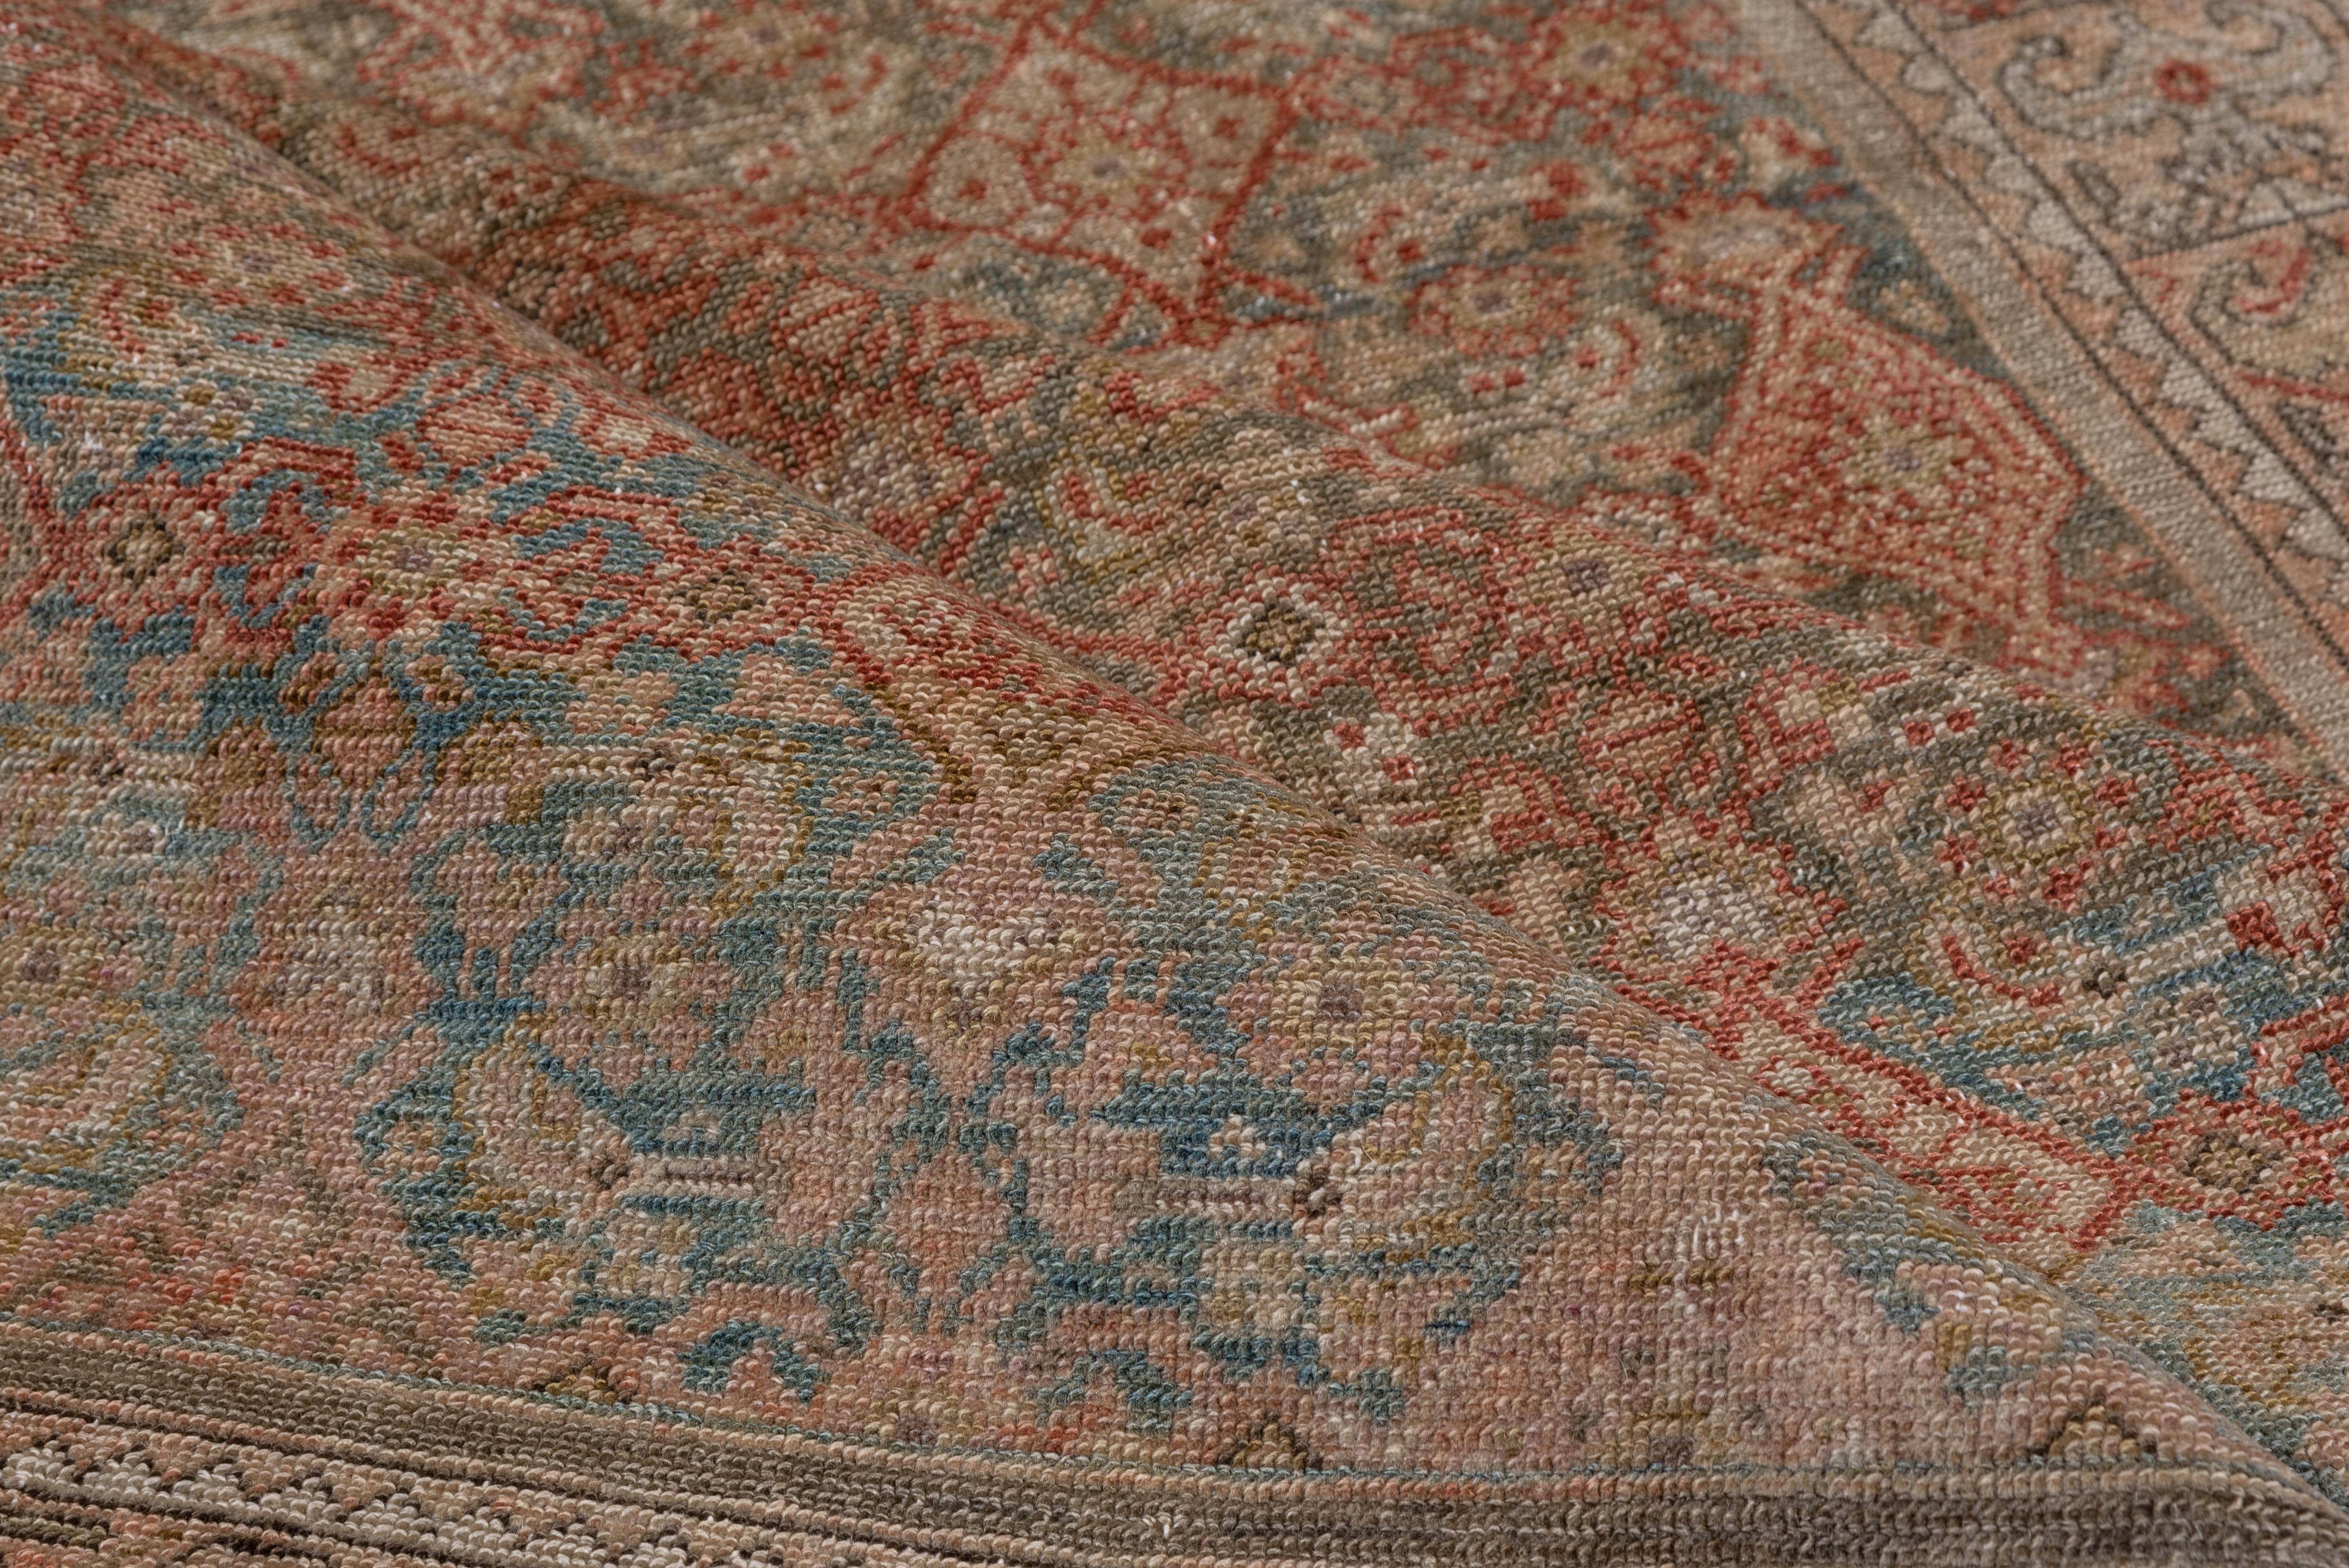 Wool Rustic Antique Persian Malayer Rug, All-Over Brown and Blue Herati Design Field